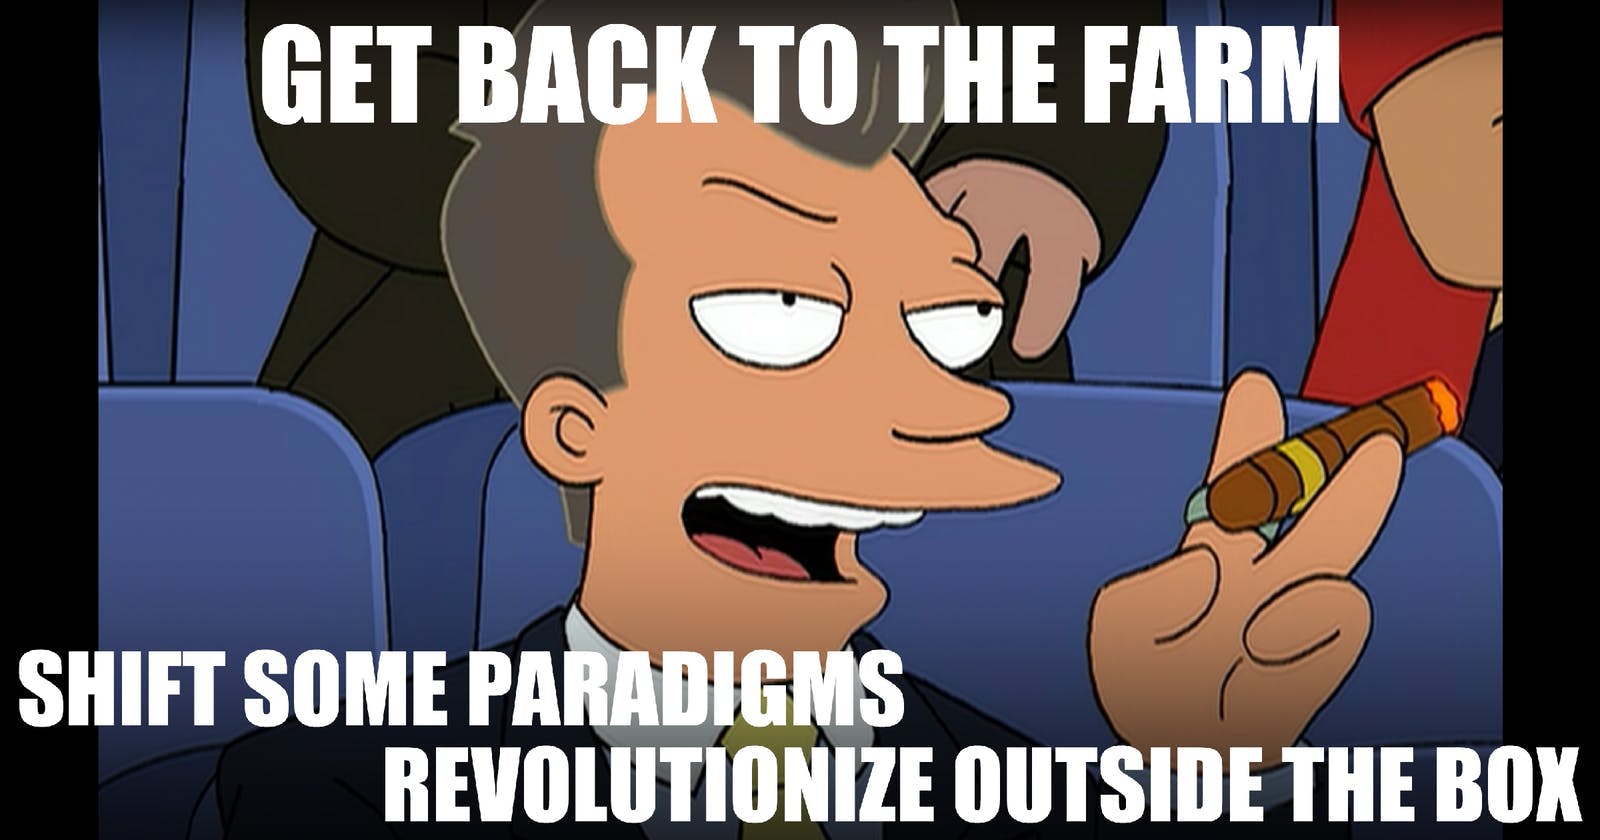 Futurama 80s Guy saying Get back to the farm, shift some paradigms, revolutionize outside the box.